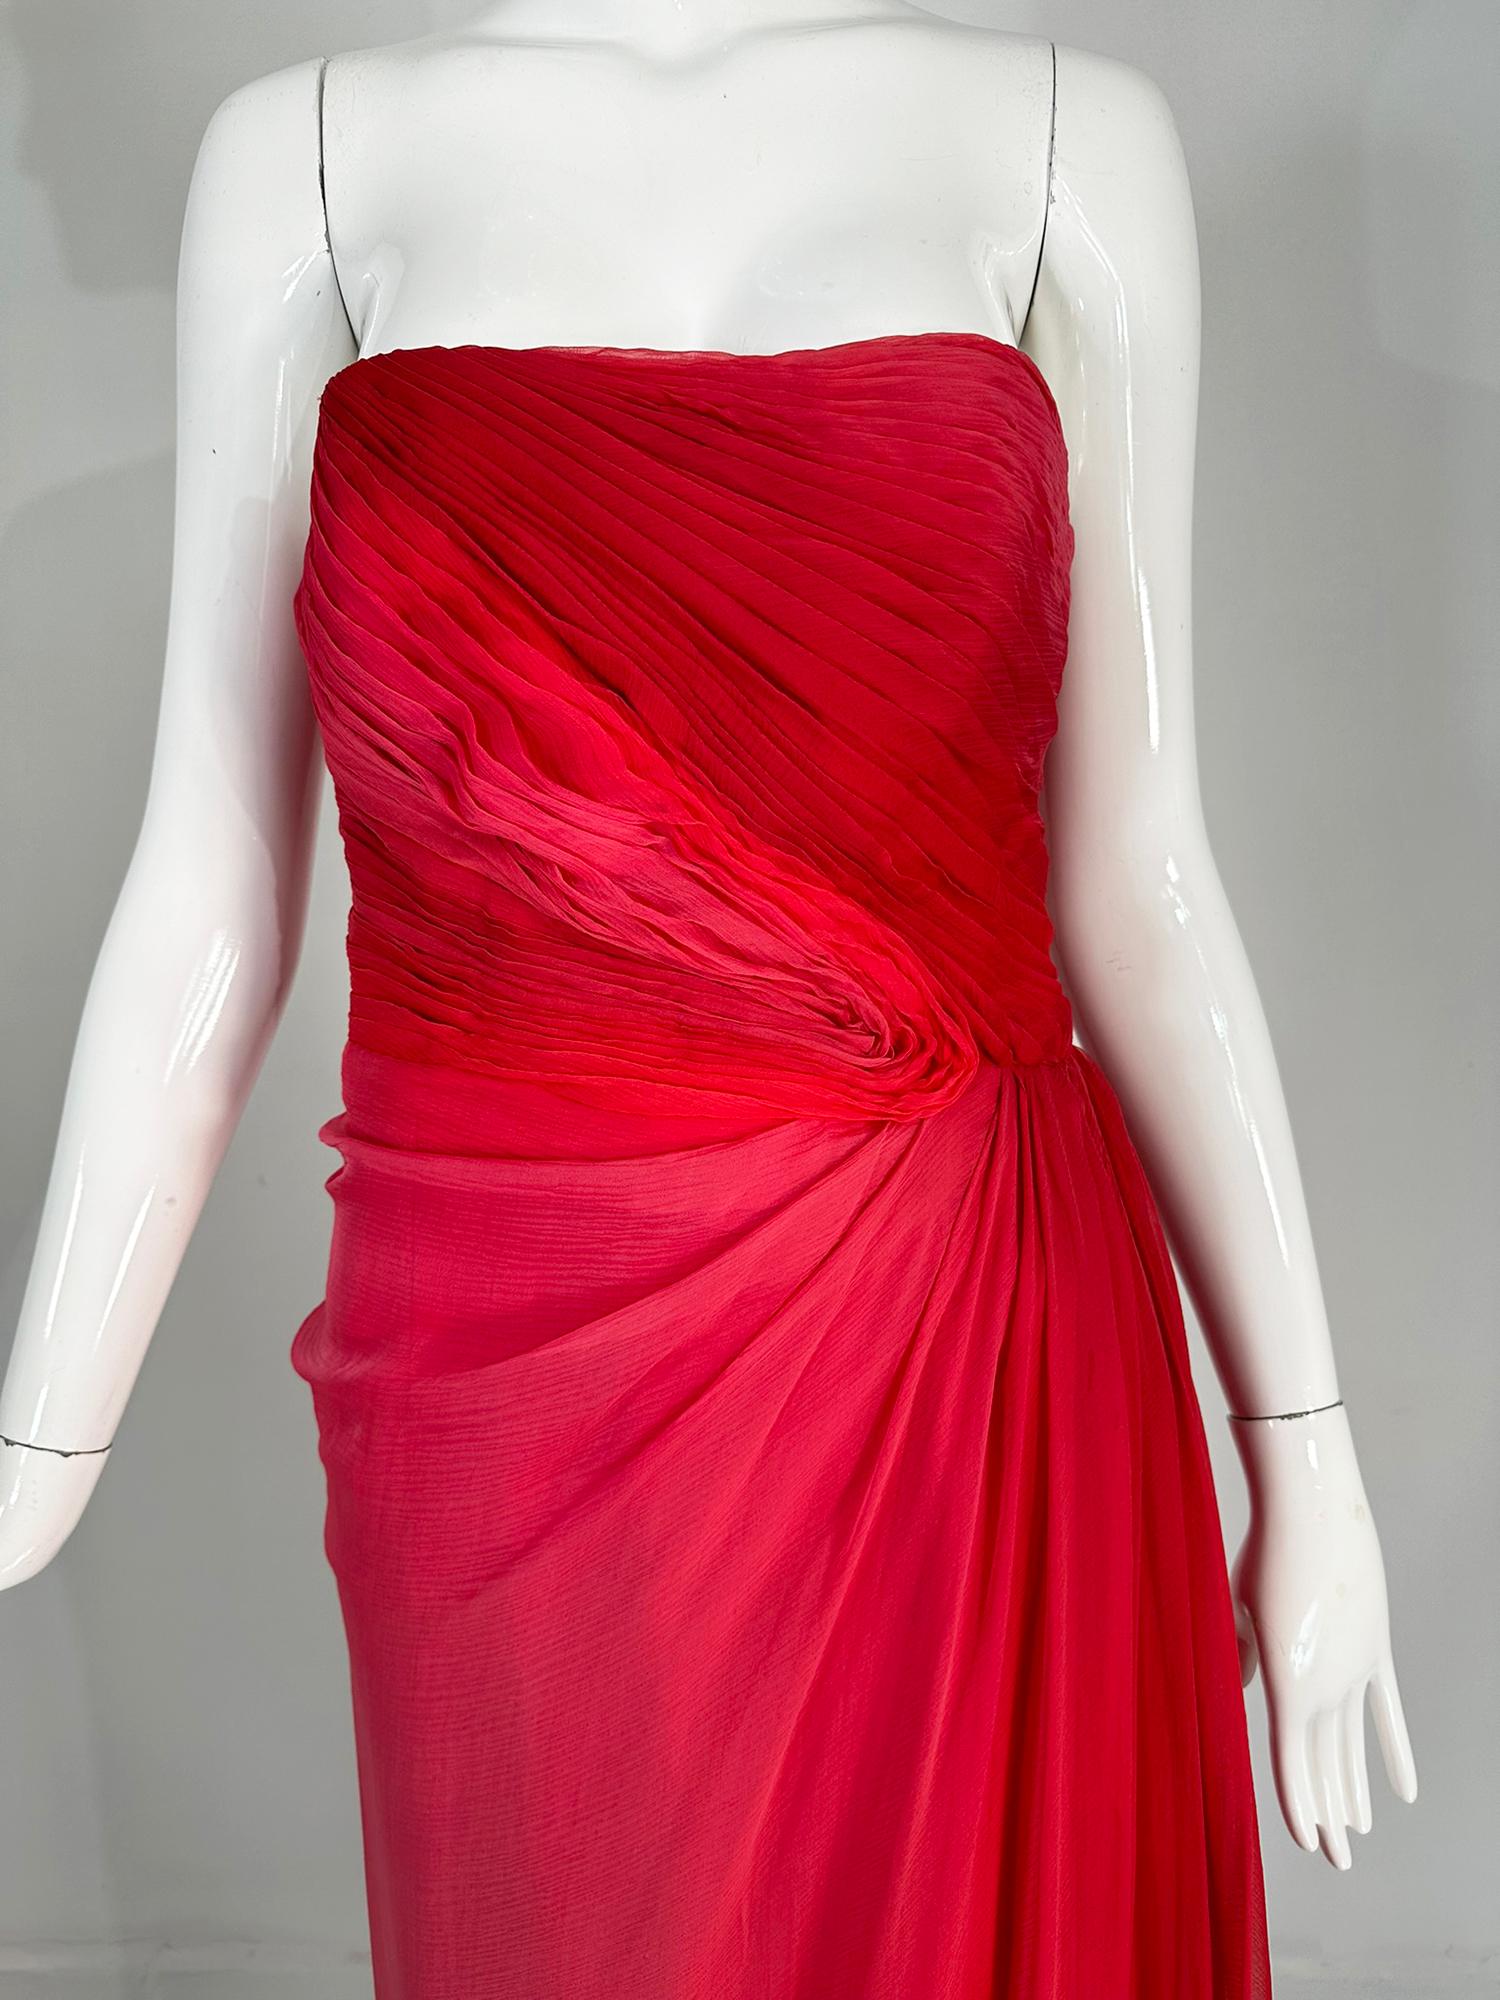 Monique Lhuillier Collection red & pink ombre pleated silk chiffon draped strapless gown. A gorgeous gown, perfect for any big event.
Strapless the bodice is done in ombre dyed pink to red silk chiffon. Diagonally pleated bodice drapes to the left